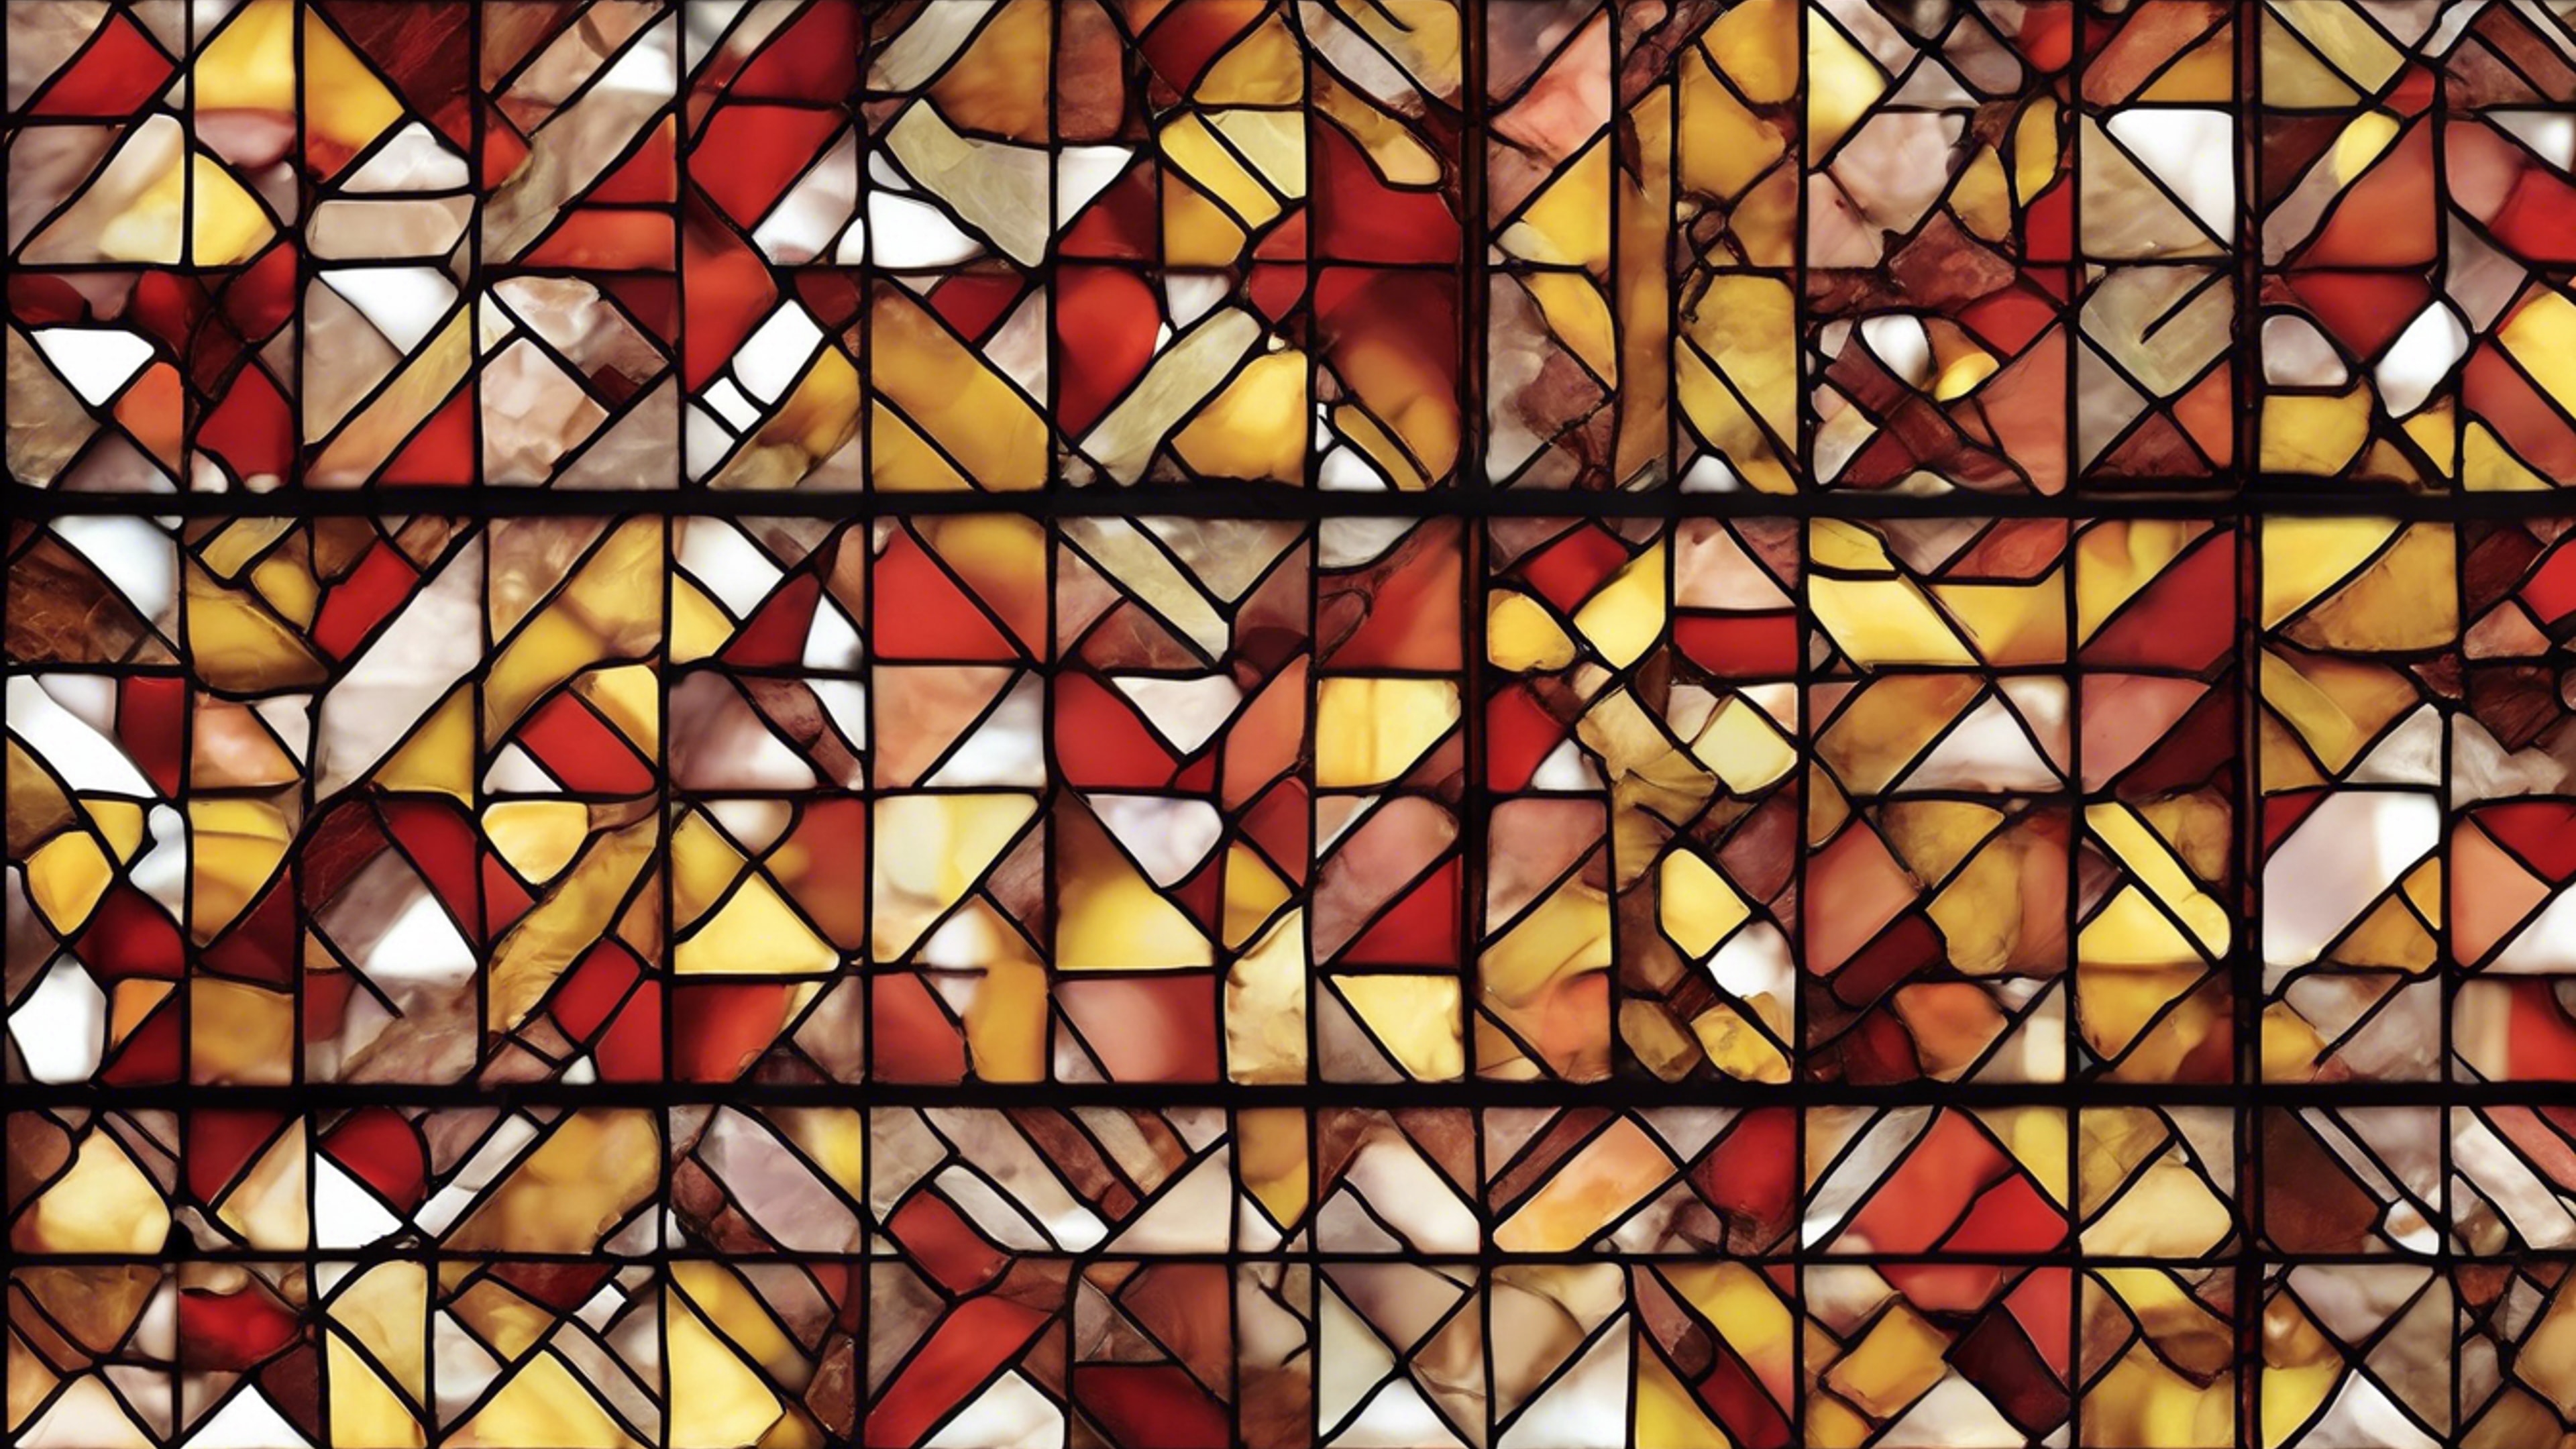 A stained glass design using a repeating motif of red and yellow bricks.壁紙[d98aa8b1ebac46789cc9]